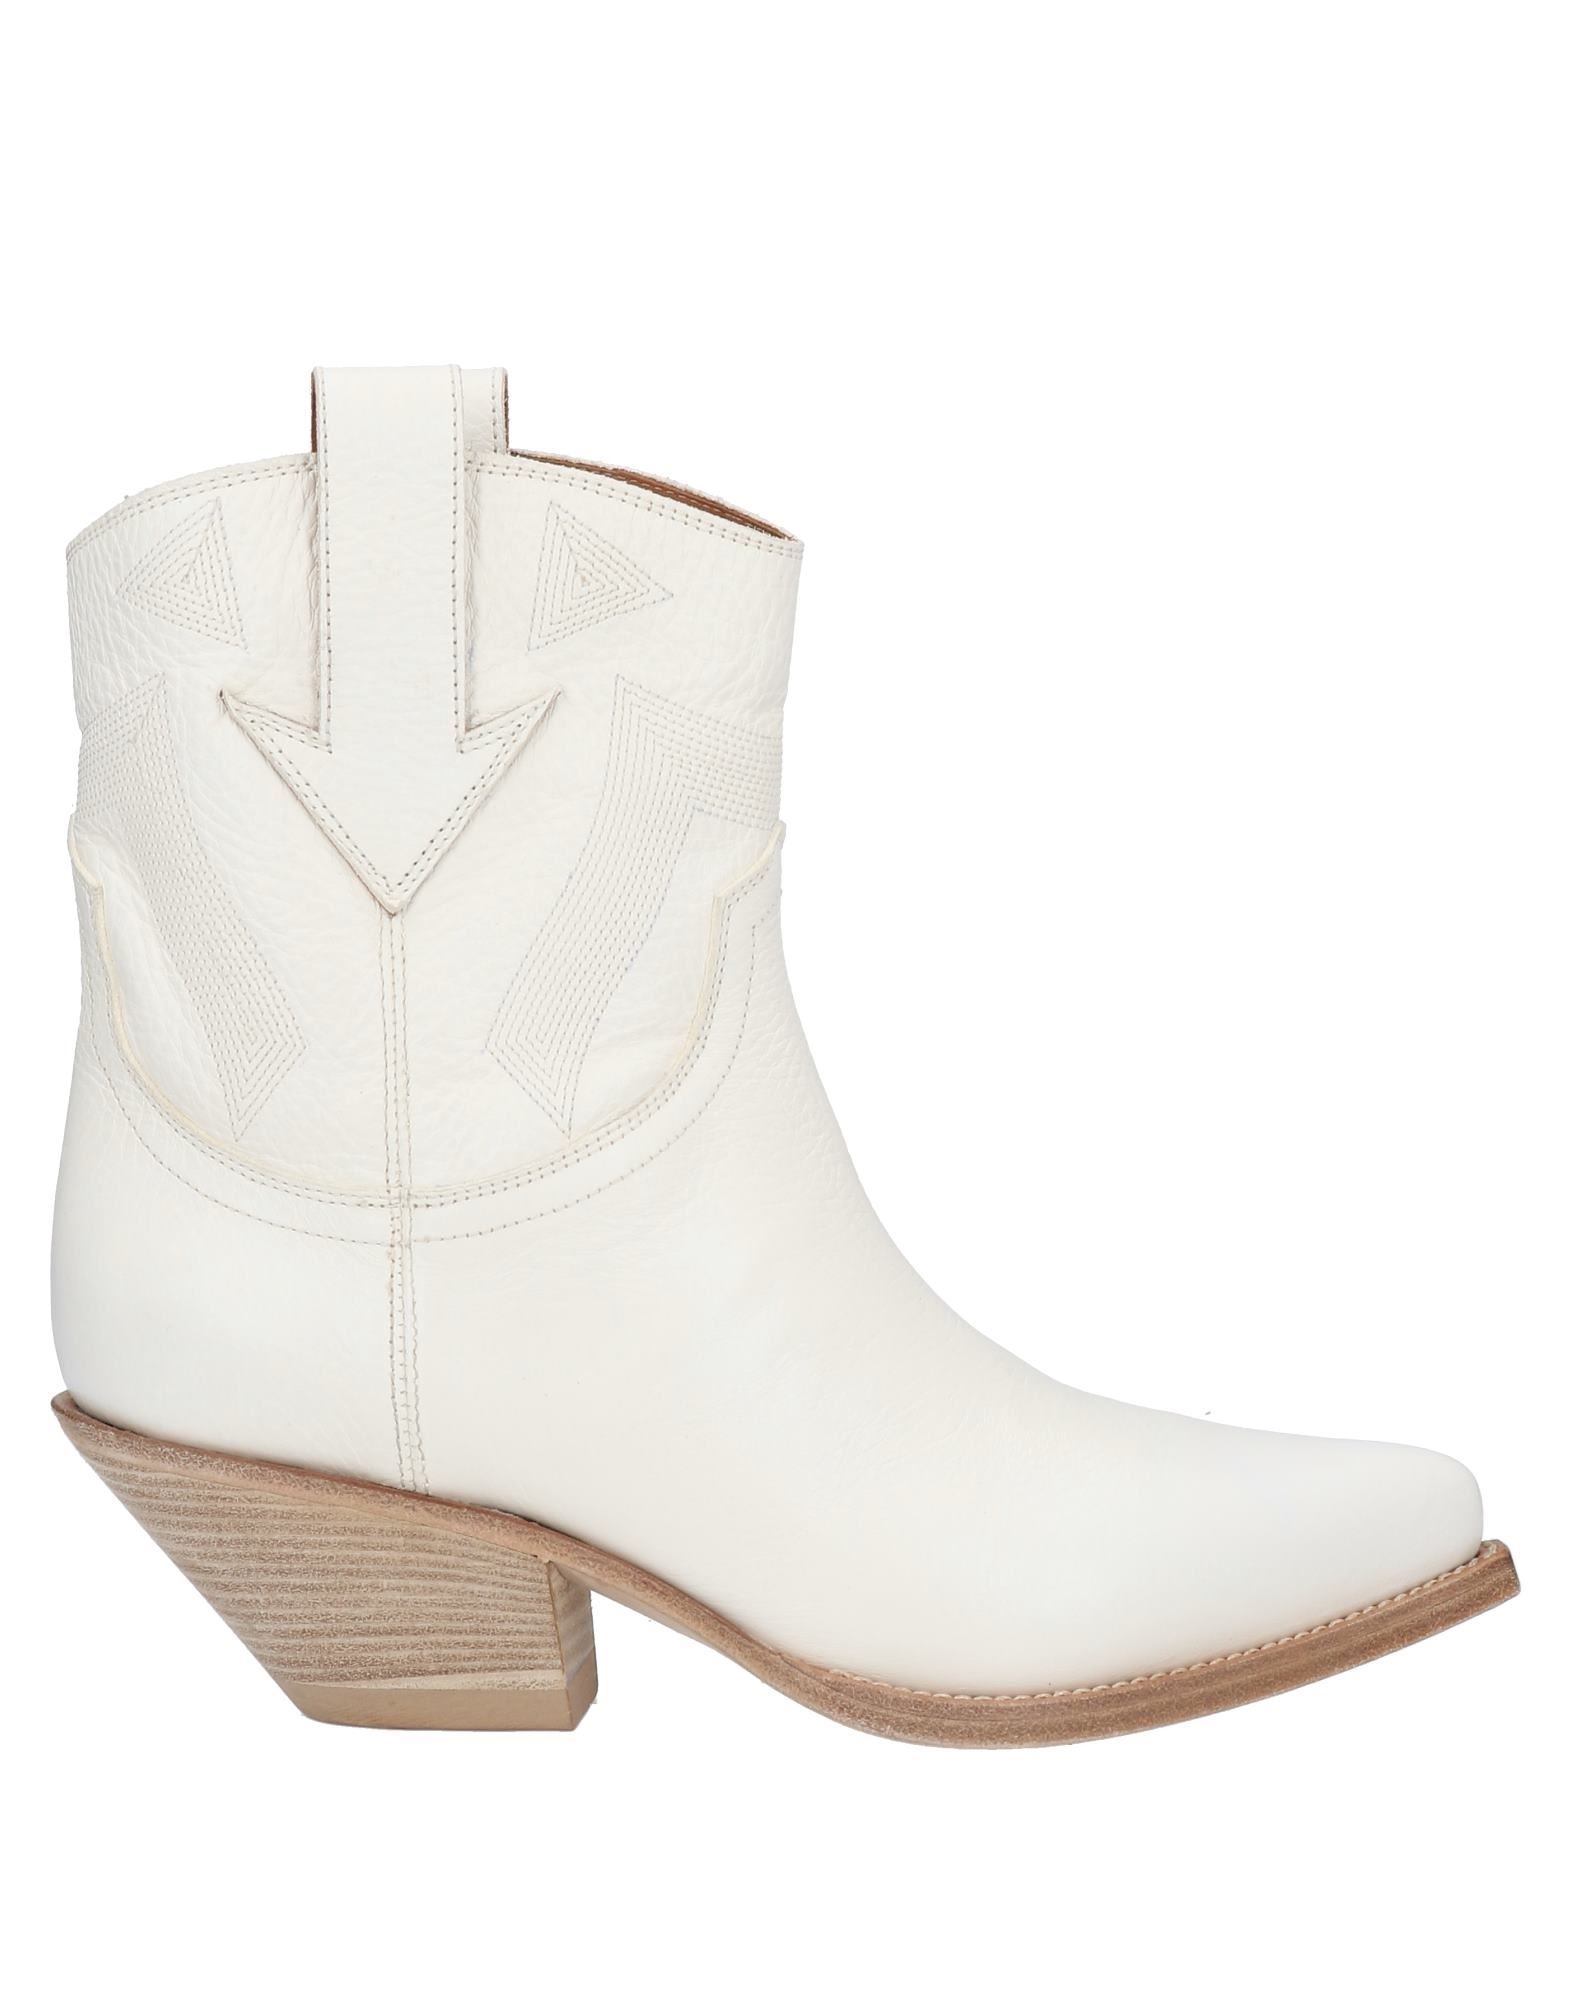 BUTTERO BUTTERO WOMAN ANKLE BOOTS IVORY SIZE 6 SOFT LEATHER,17056568MF 7